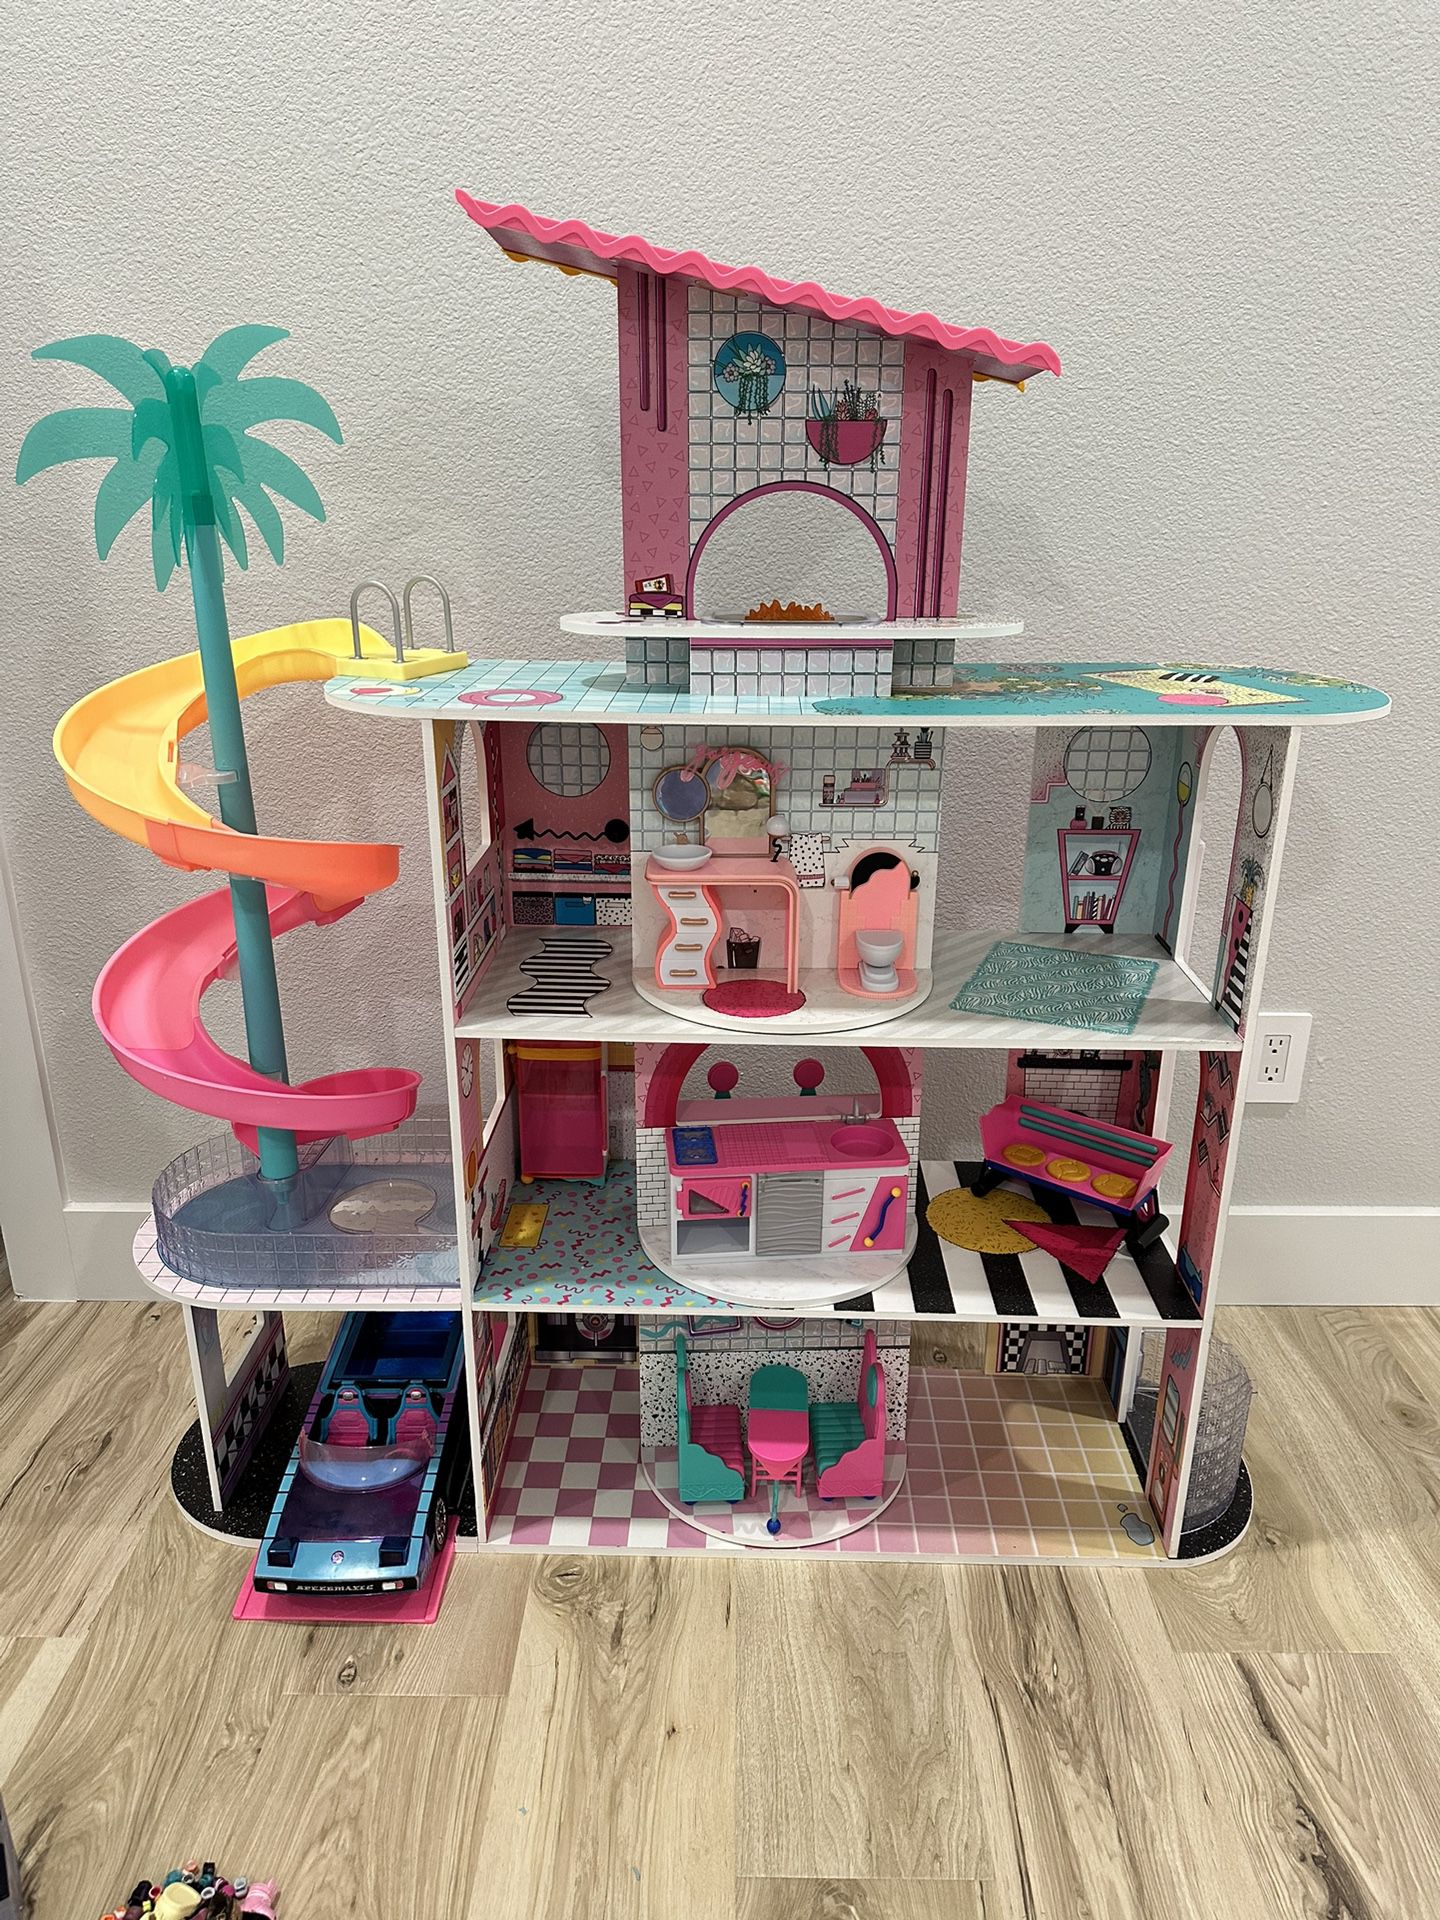 LOL Doll House, 82 Dolls, A Case, A Car And Accessories 